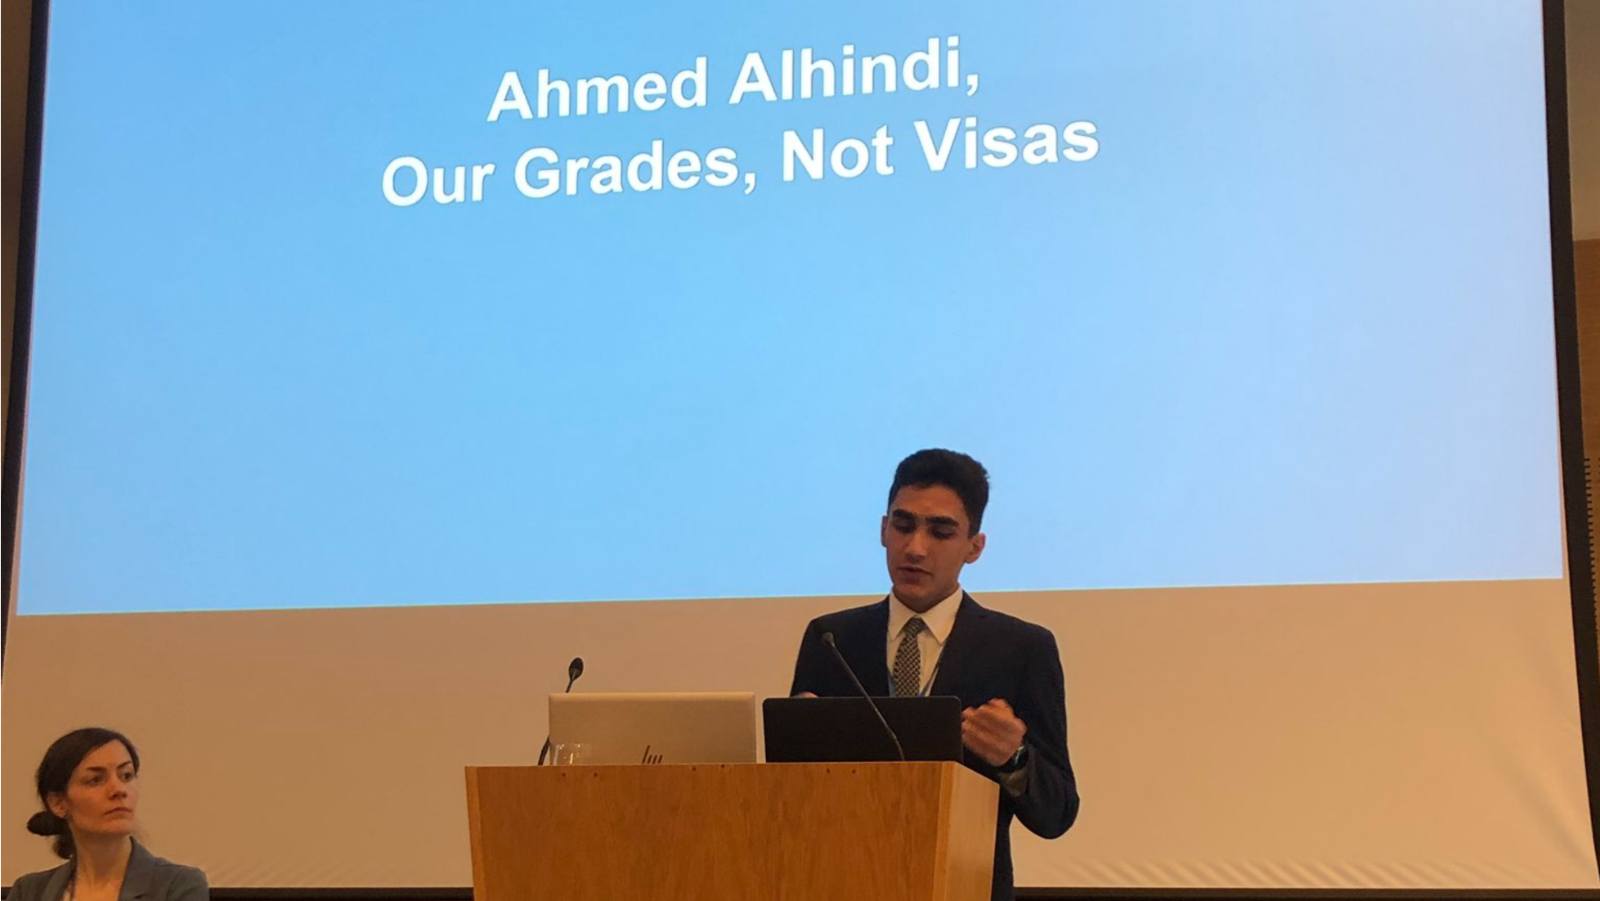 Ahmed Alhindi speaking about the Our Grades Not Visas Campaign